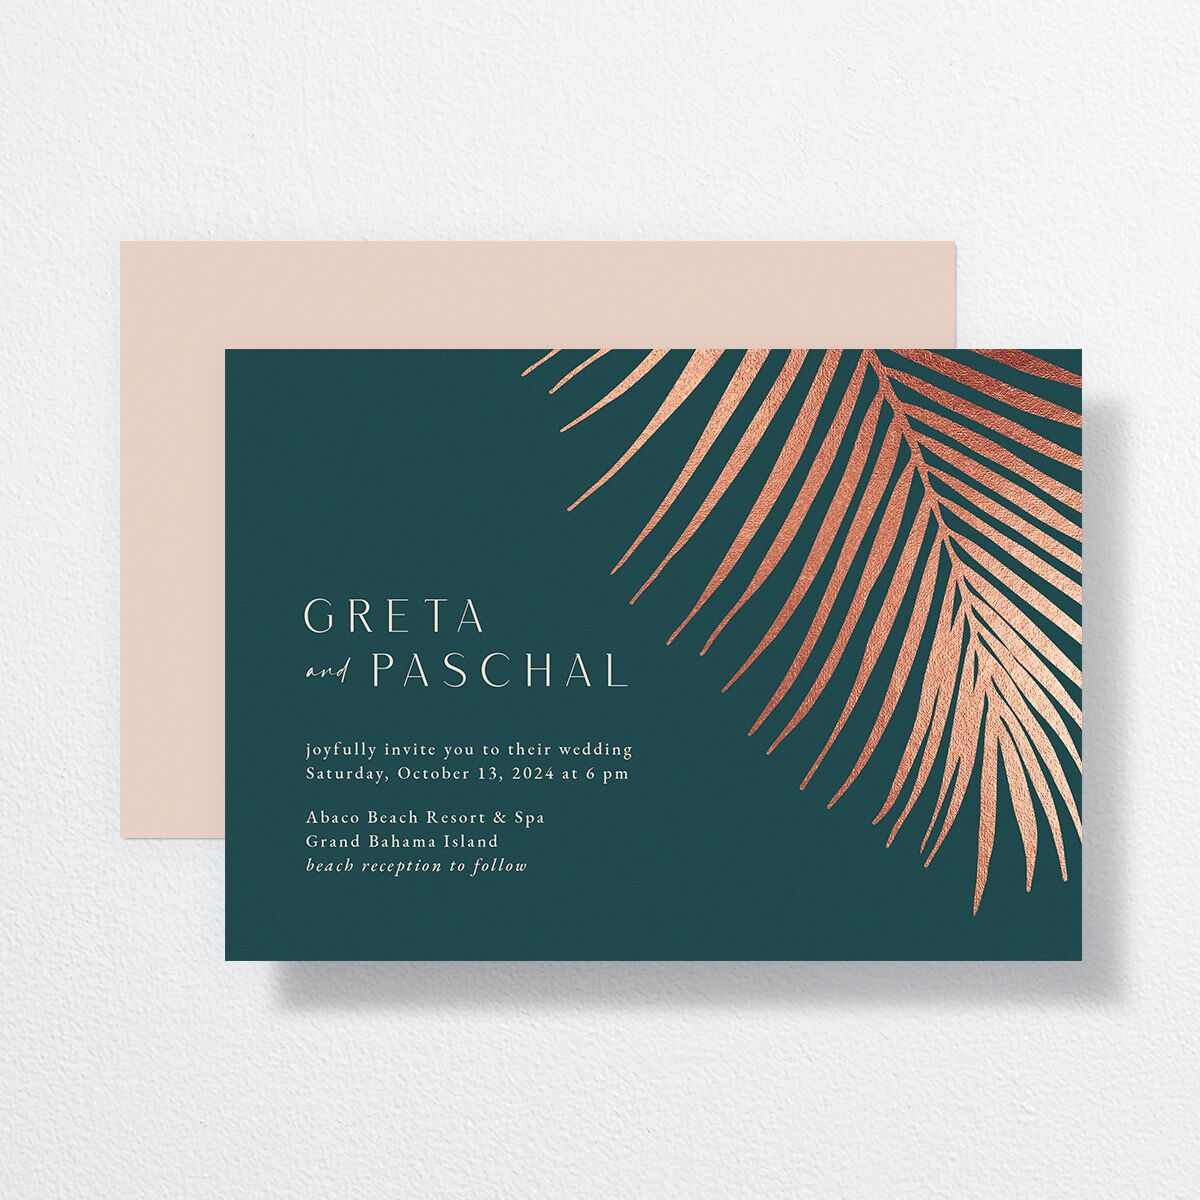 Lavish Palm Wedding Invitations front-and-back in teal